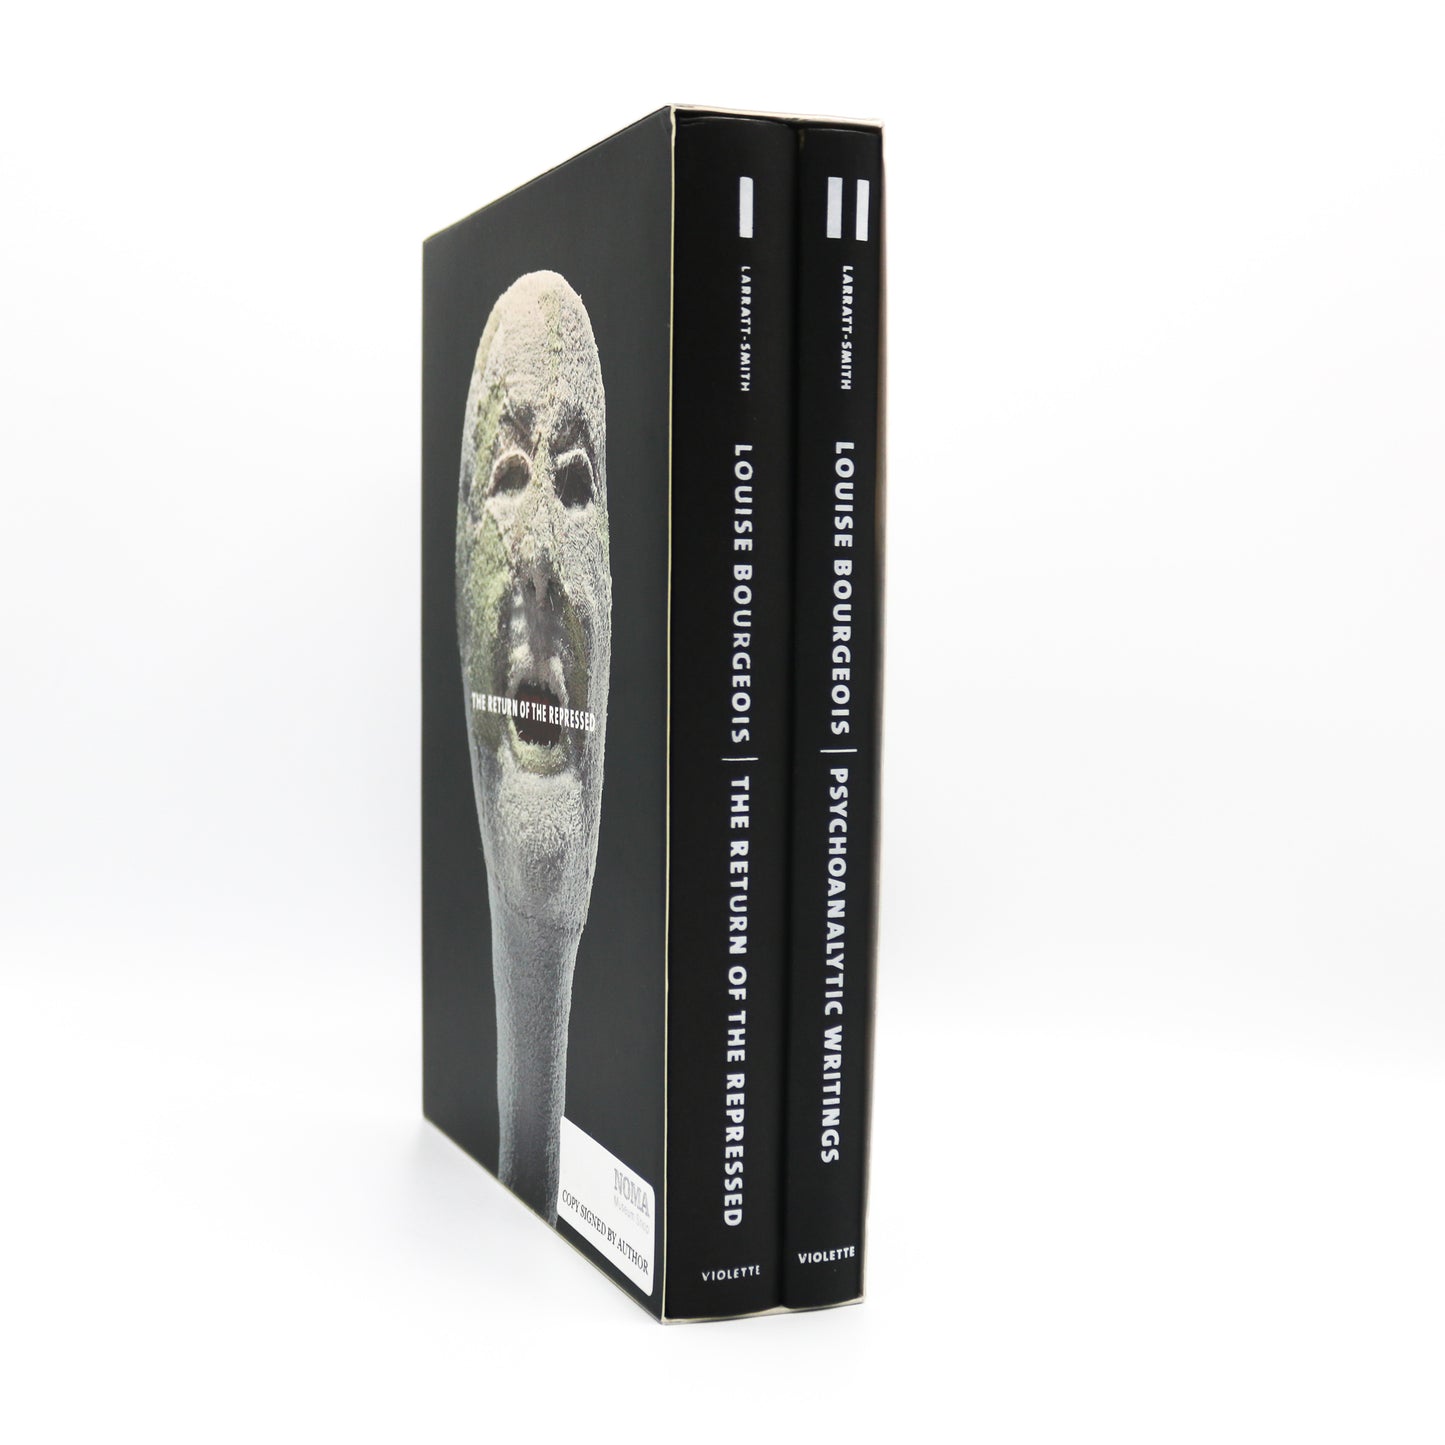 Louise Bourgeois: The Return of the Repressed Box Set